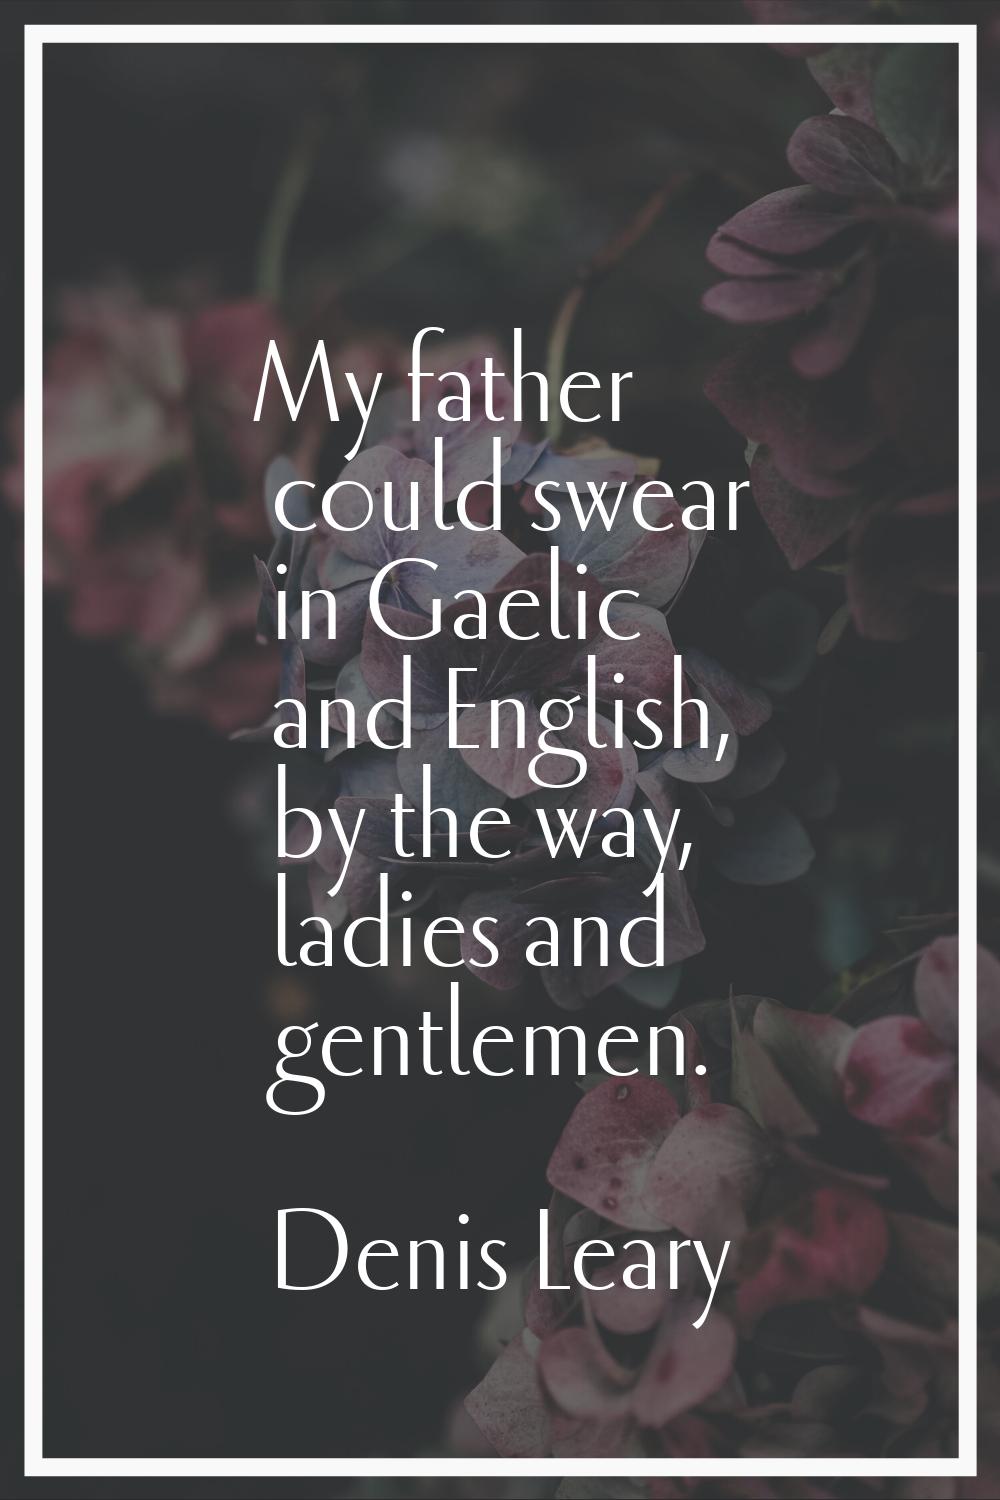 My father could swear in Gaelic and English, by the way, ladies and gentlemen.